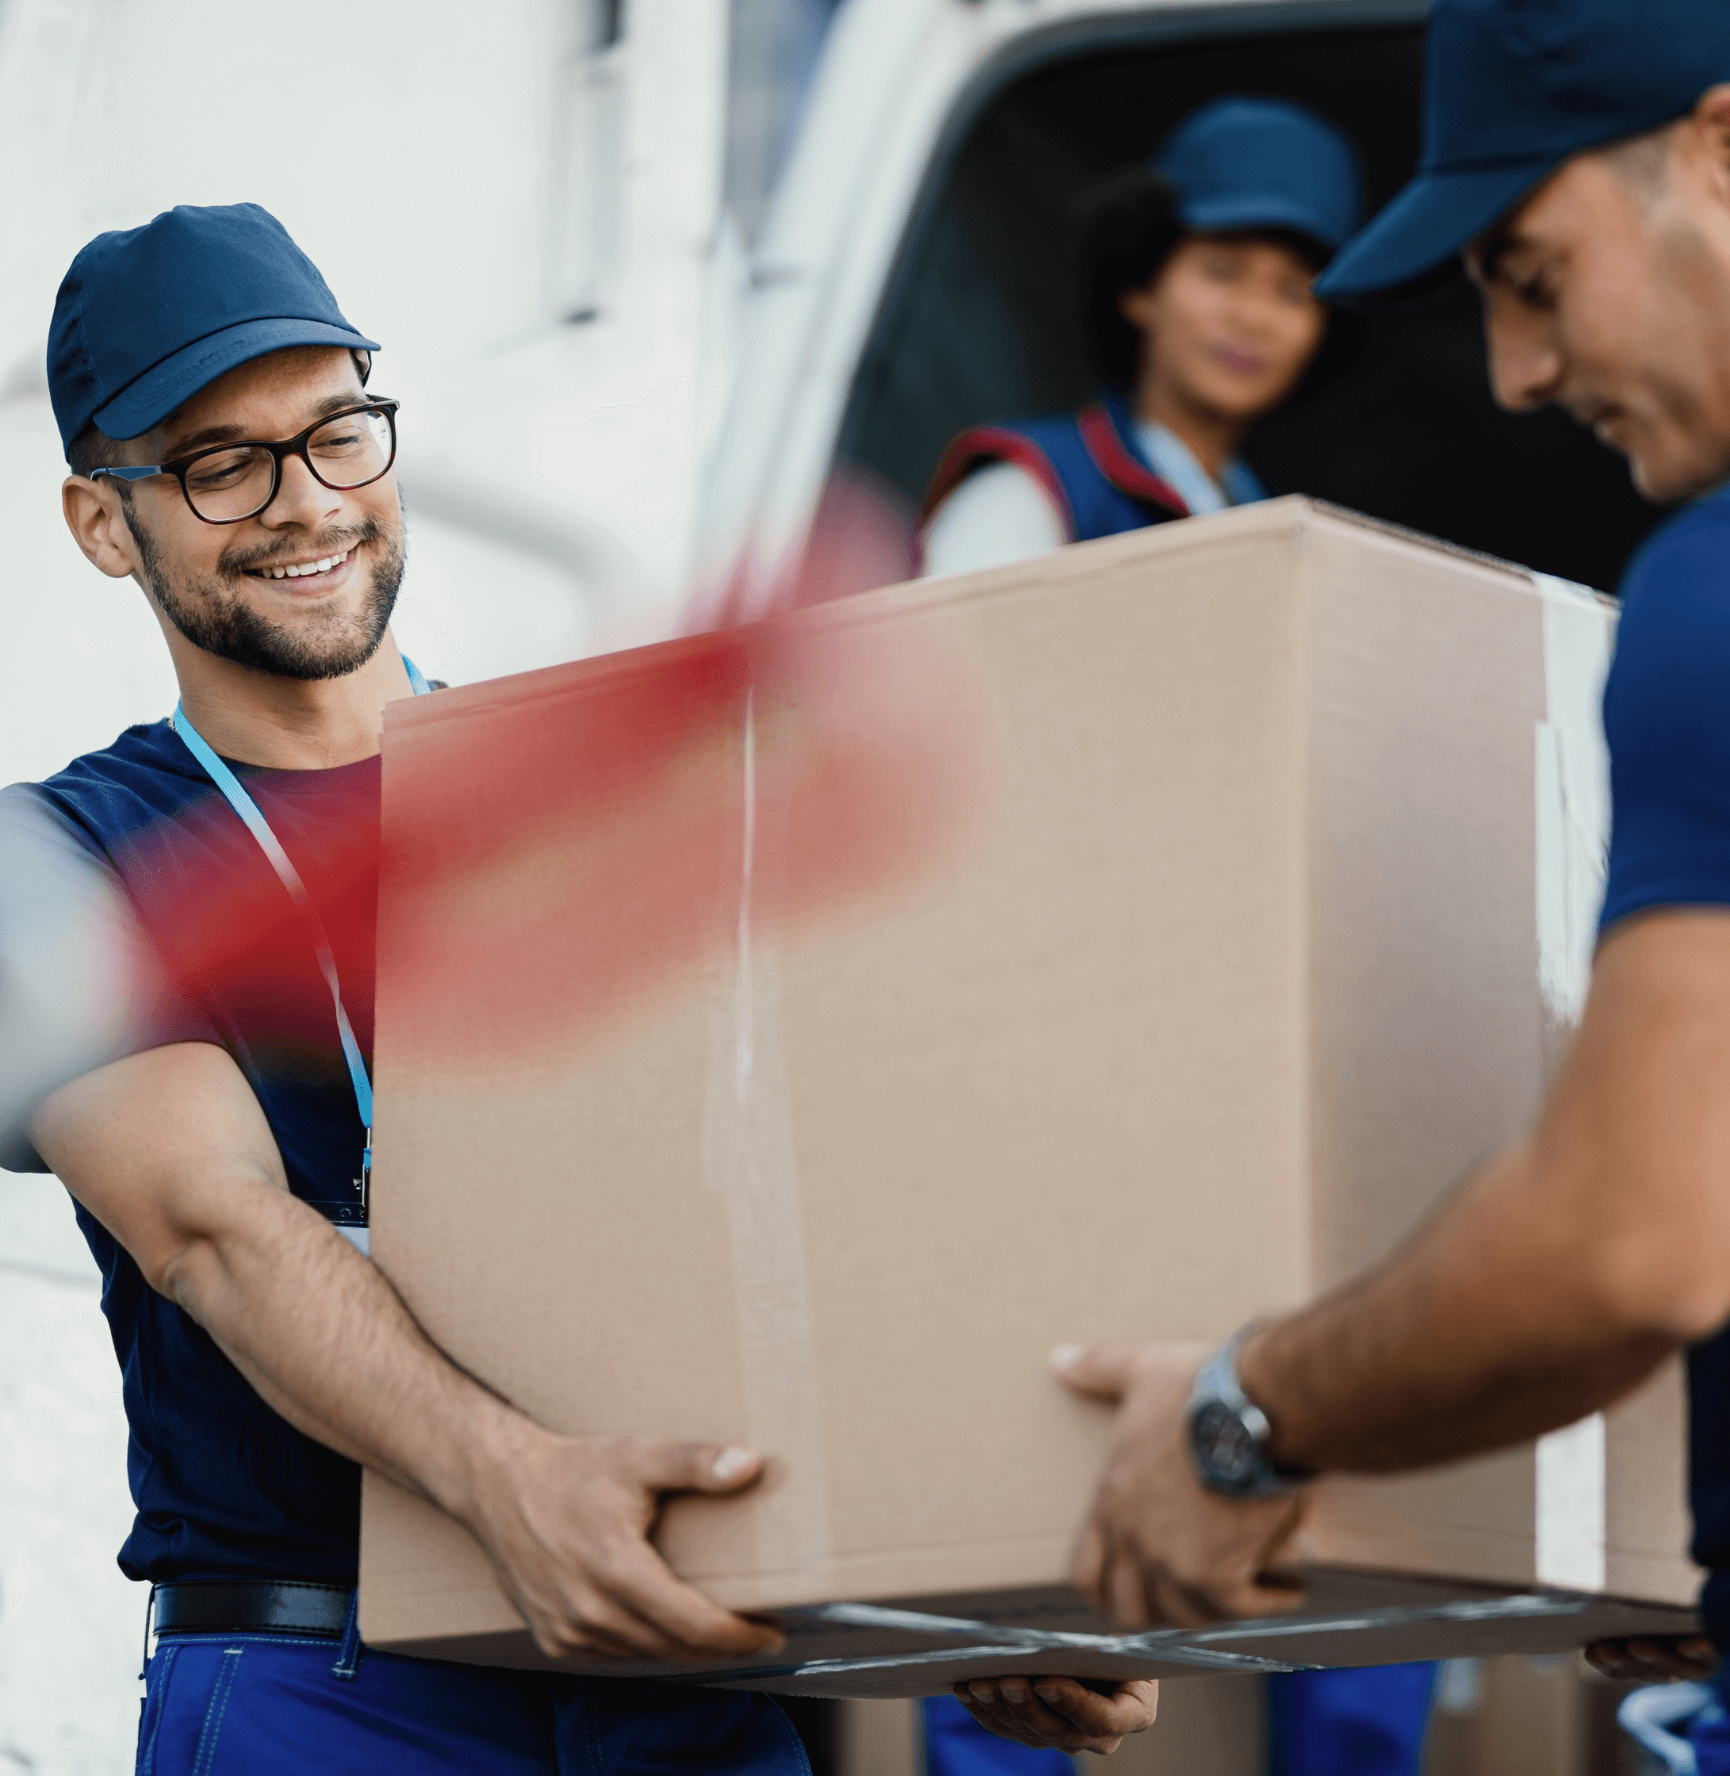 Two cheerful delivery professionals collaborating to load a cardboard box into a delivery van, ensuring a smooth and efficient process.